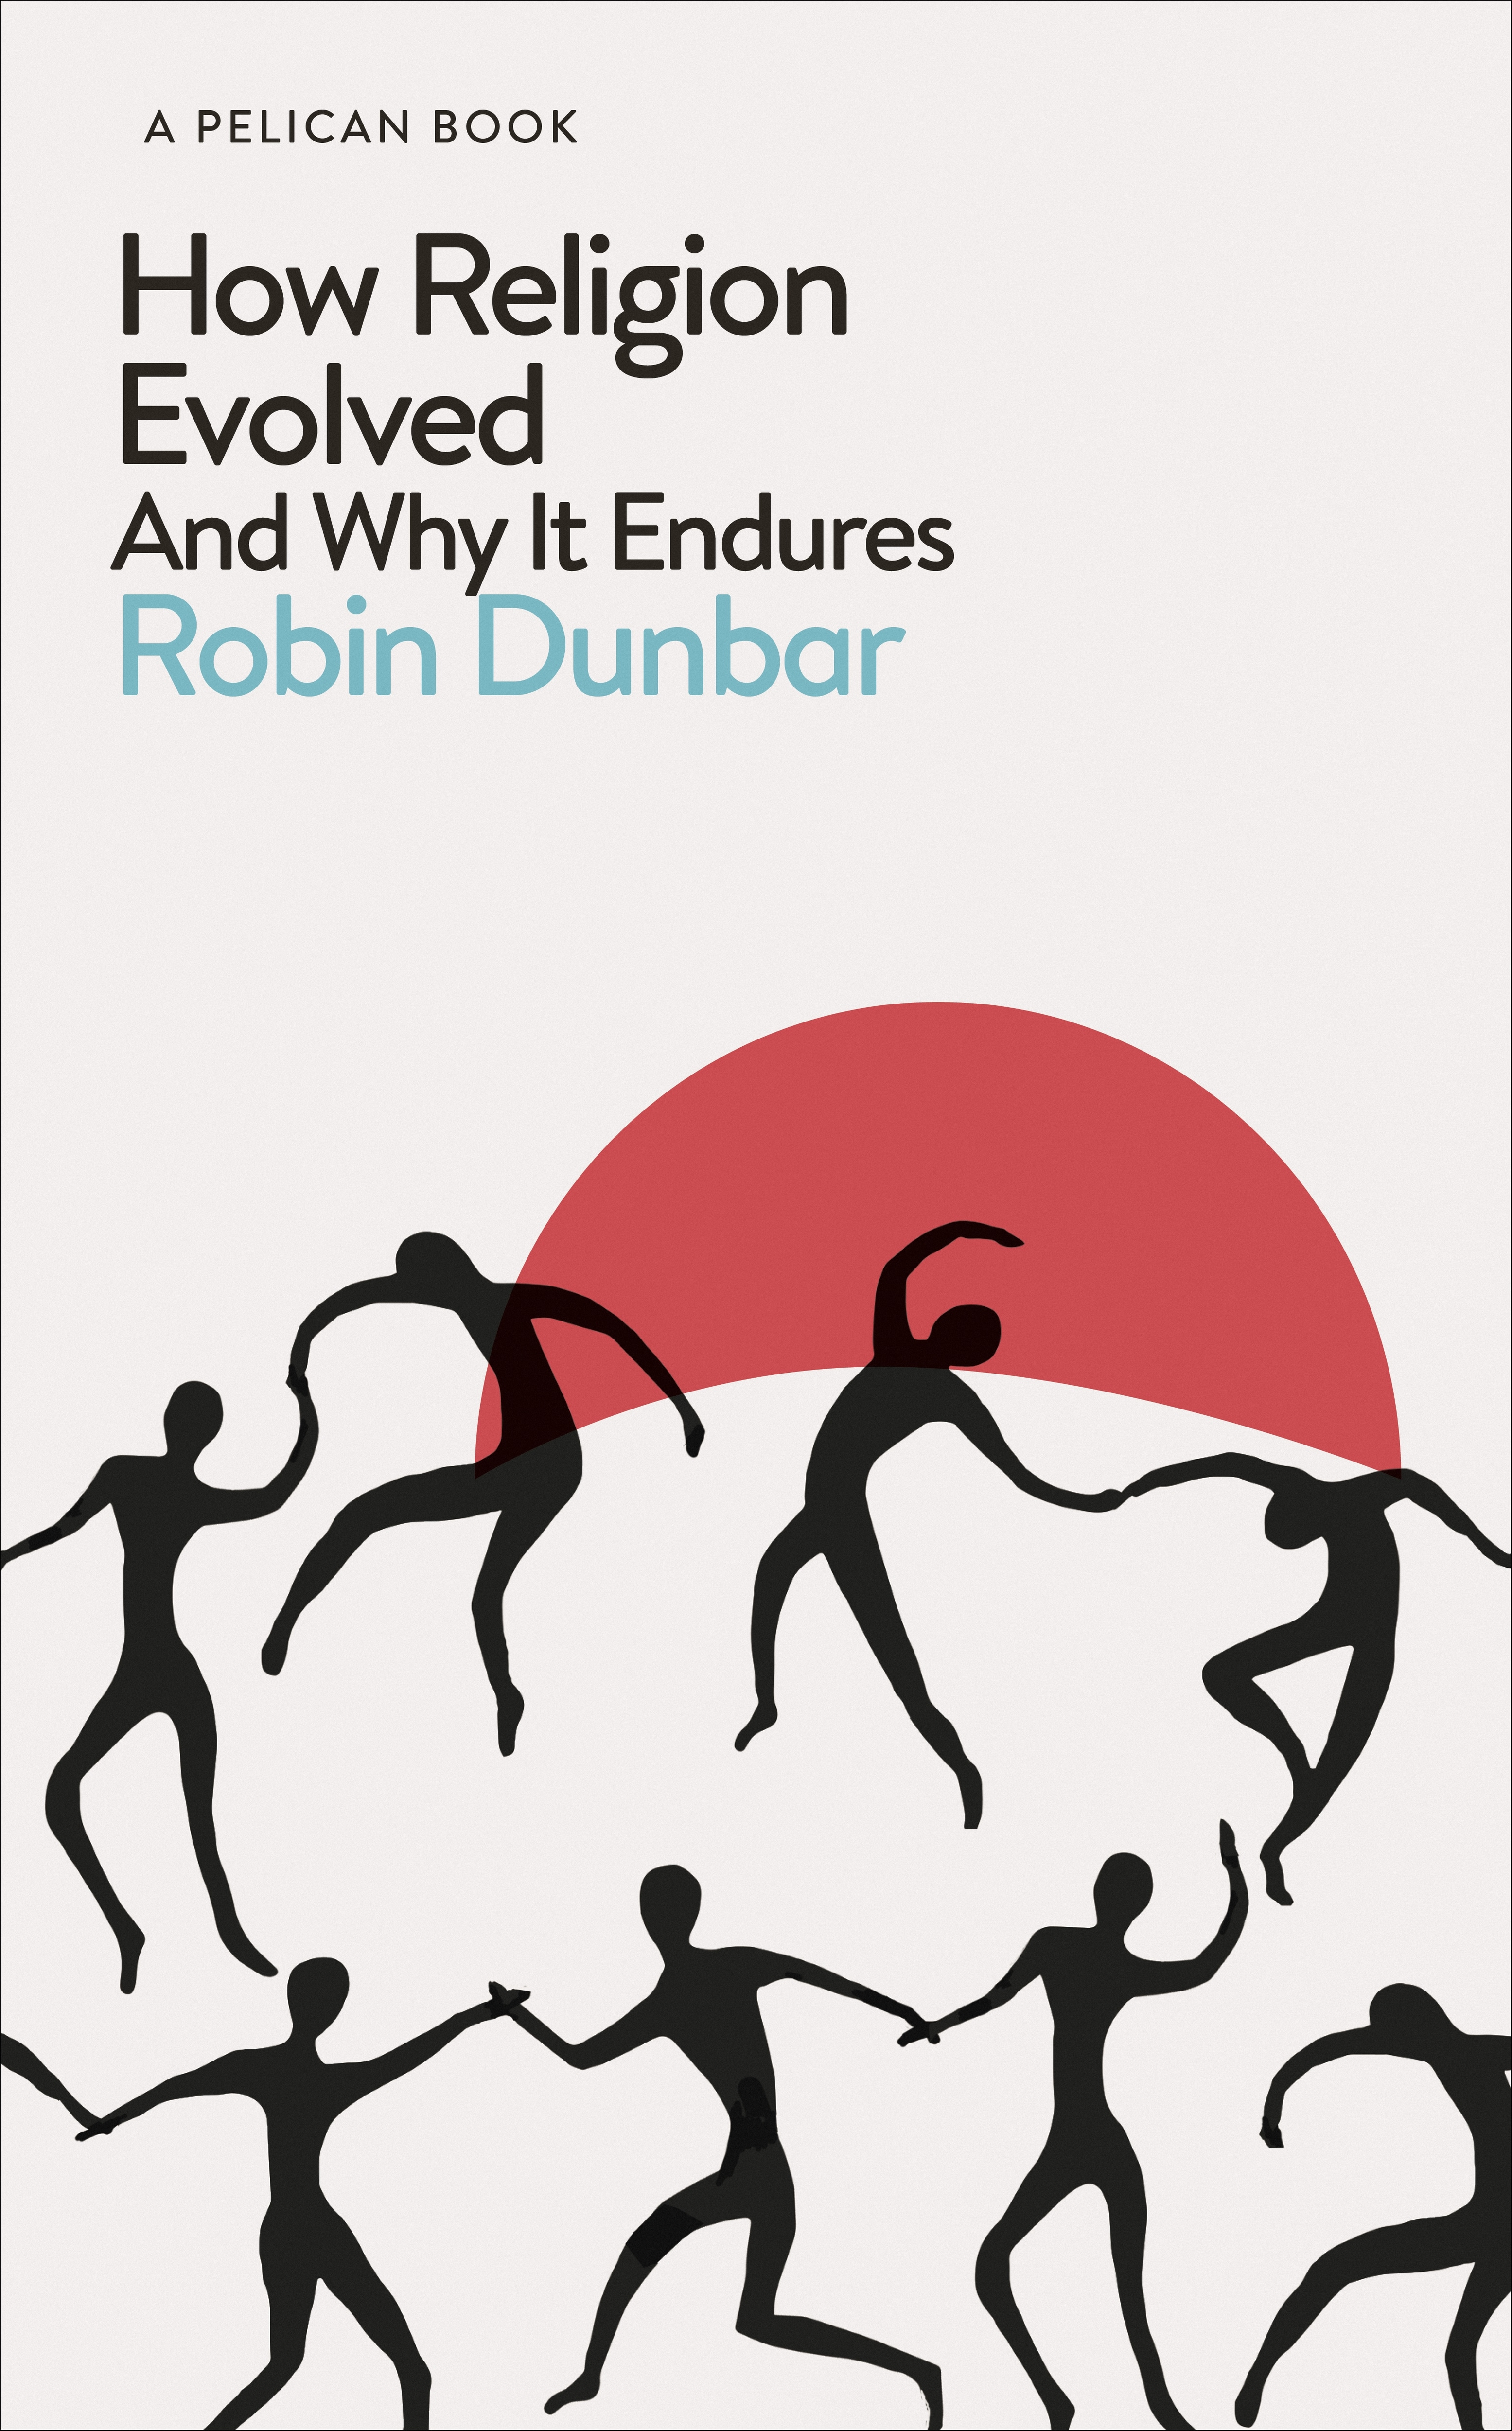 Book “How Religion Evolved” by Robin Dunbar — April 7, 2022